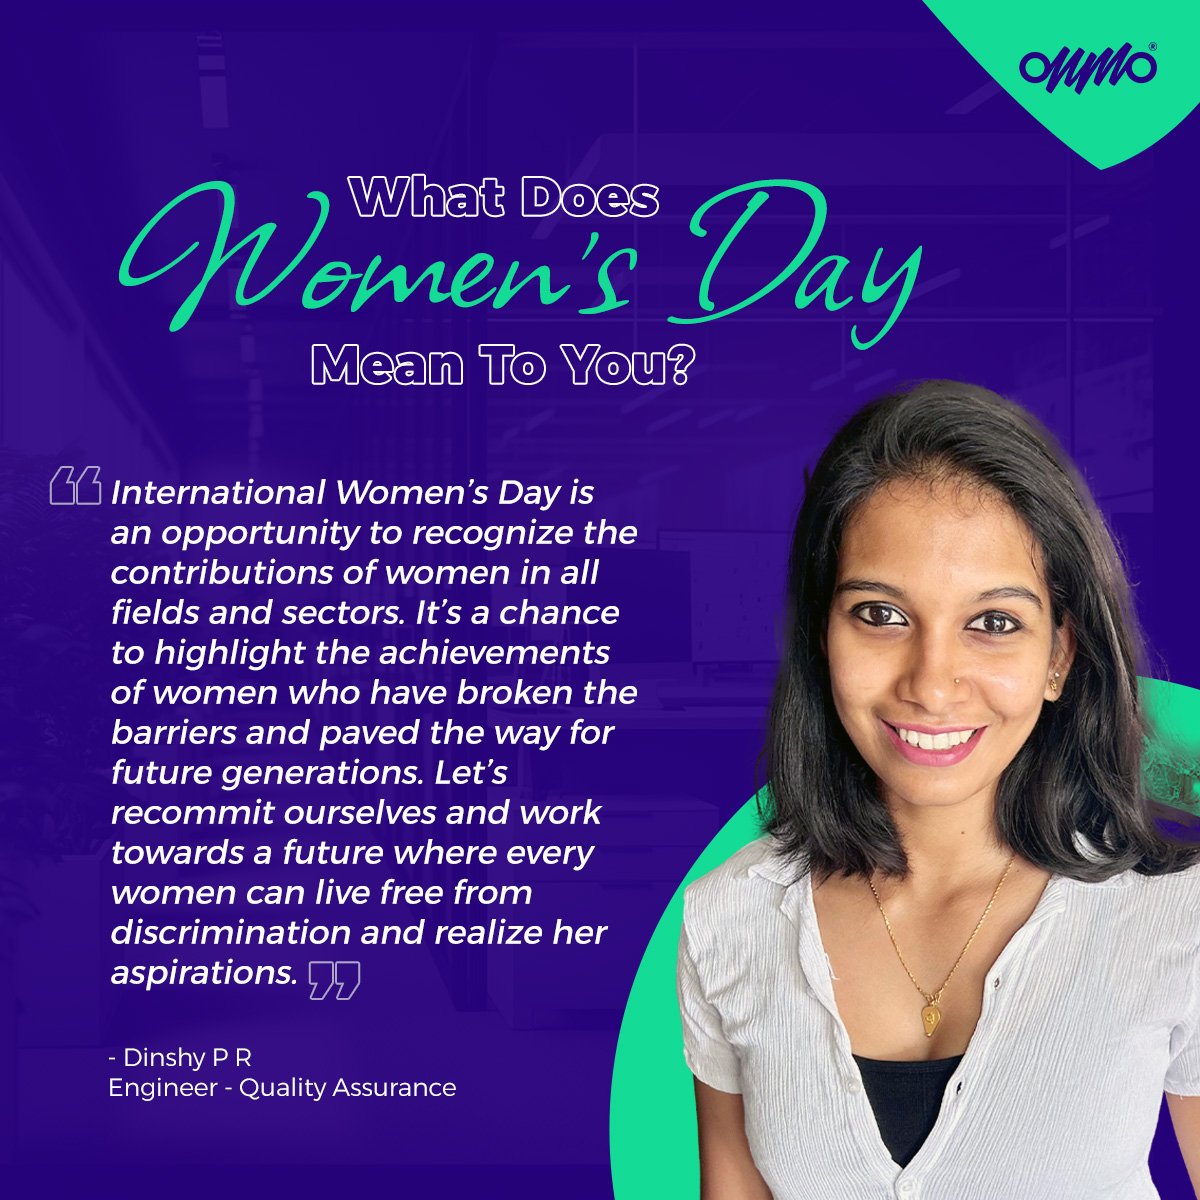 Dinshy from our Quality Assurance Team shares her thoughts on the brave journey of women and the importance of equality. #InternationalWomensDay #IWD